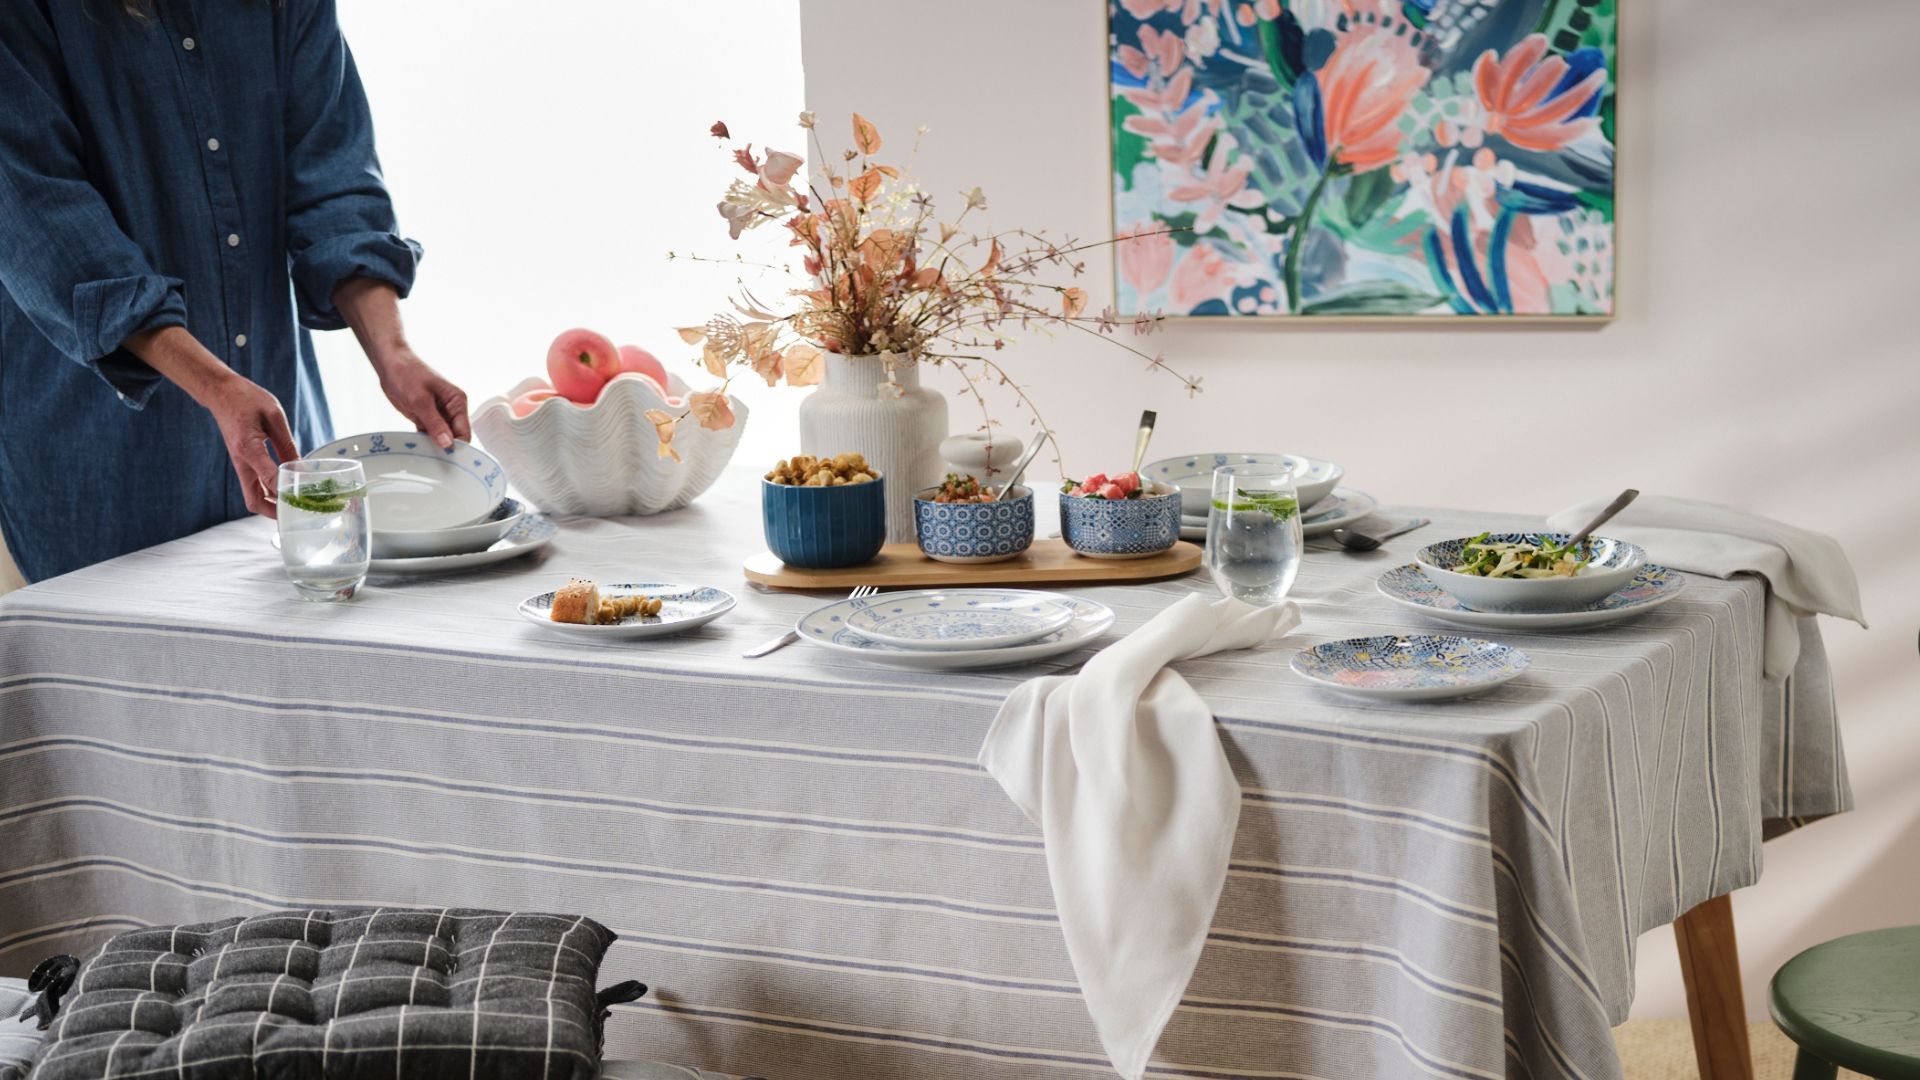 Dining table covered in a striped tablecloth and set with blue dinnerware and shell fruit bowl